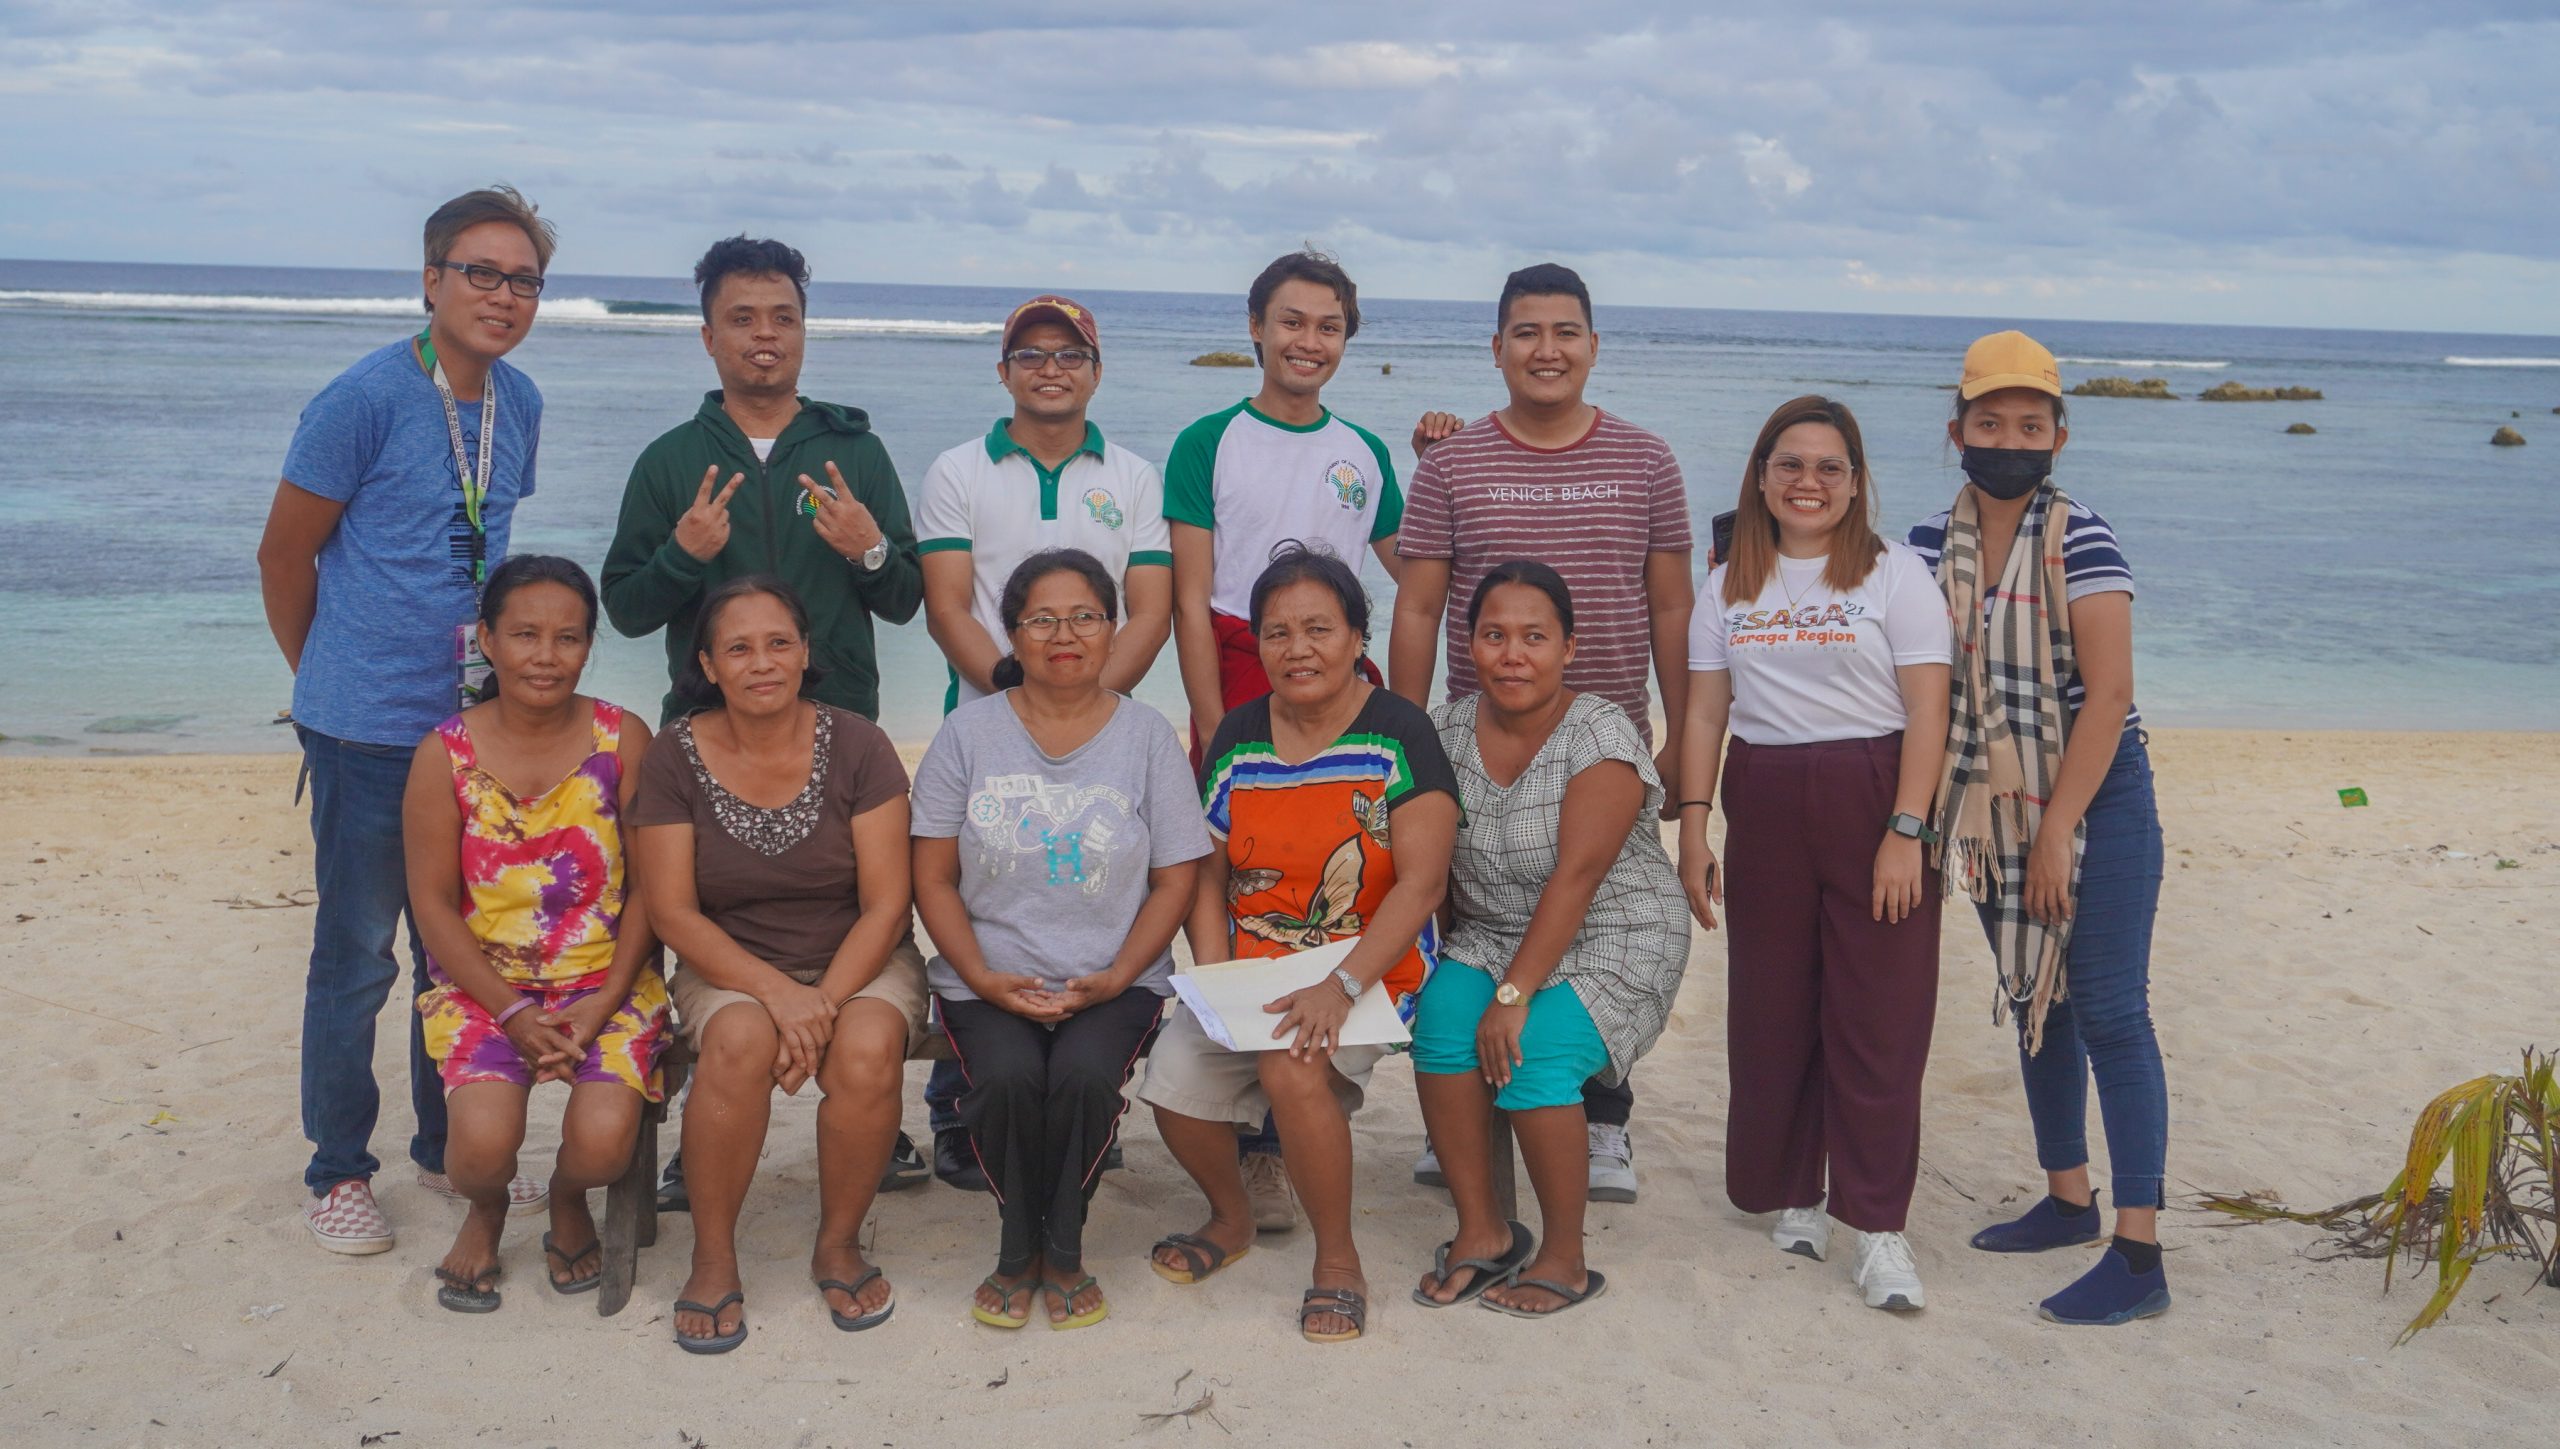 DA-SAAD Caraga orients for Phase 2 expansion in Siargao and Dinagat Islands